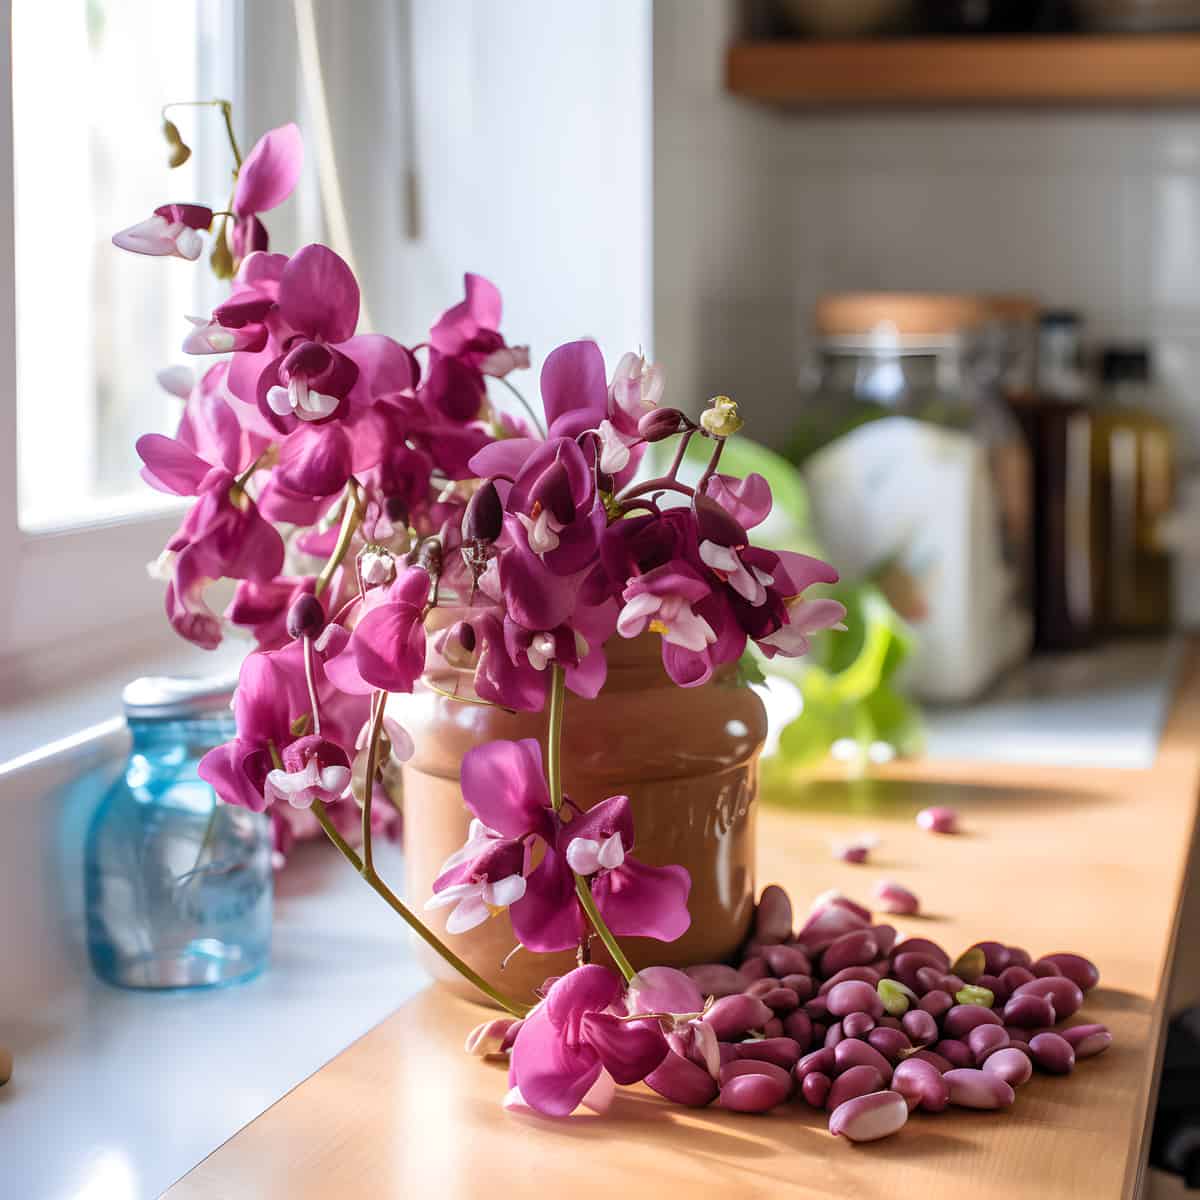 Hyacinth Beans on a kitchen counter